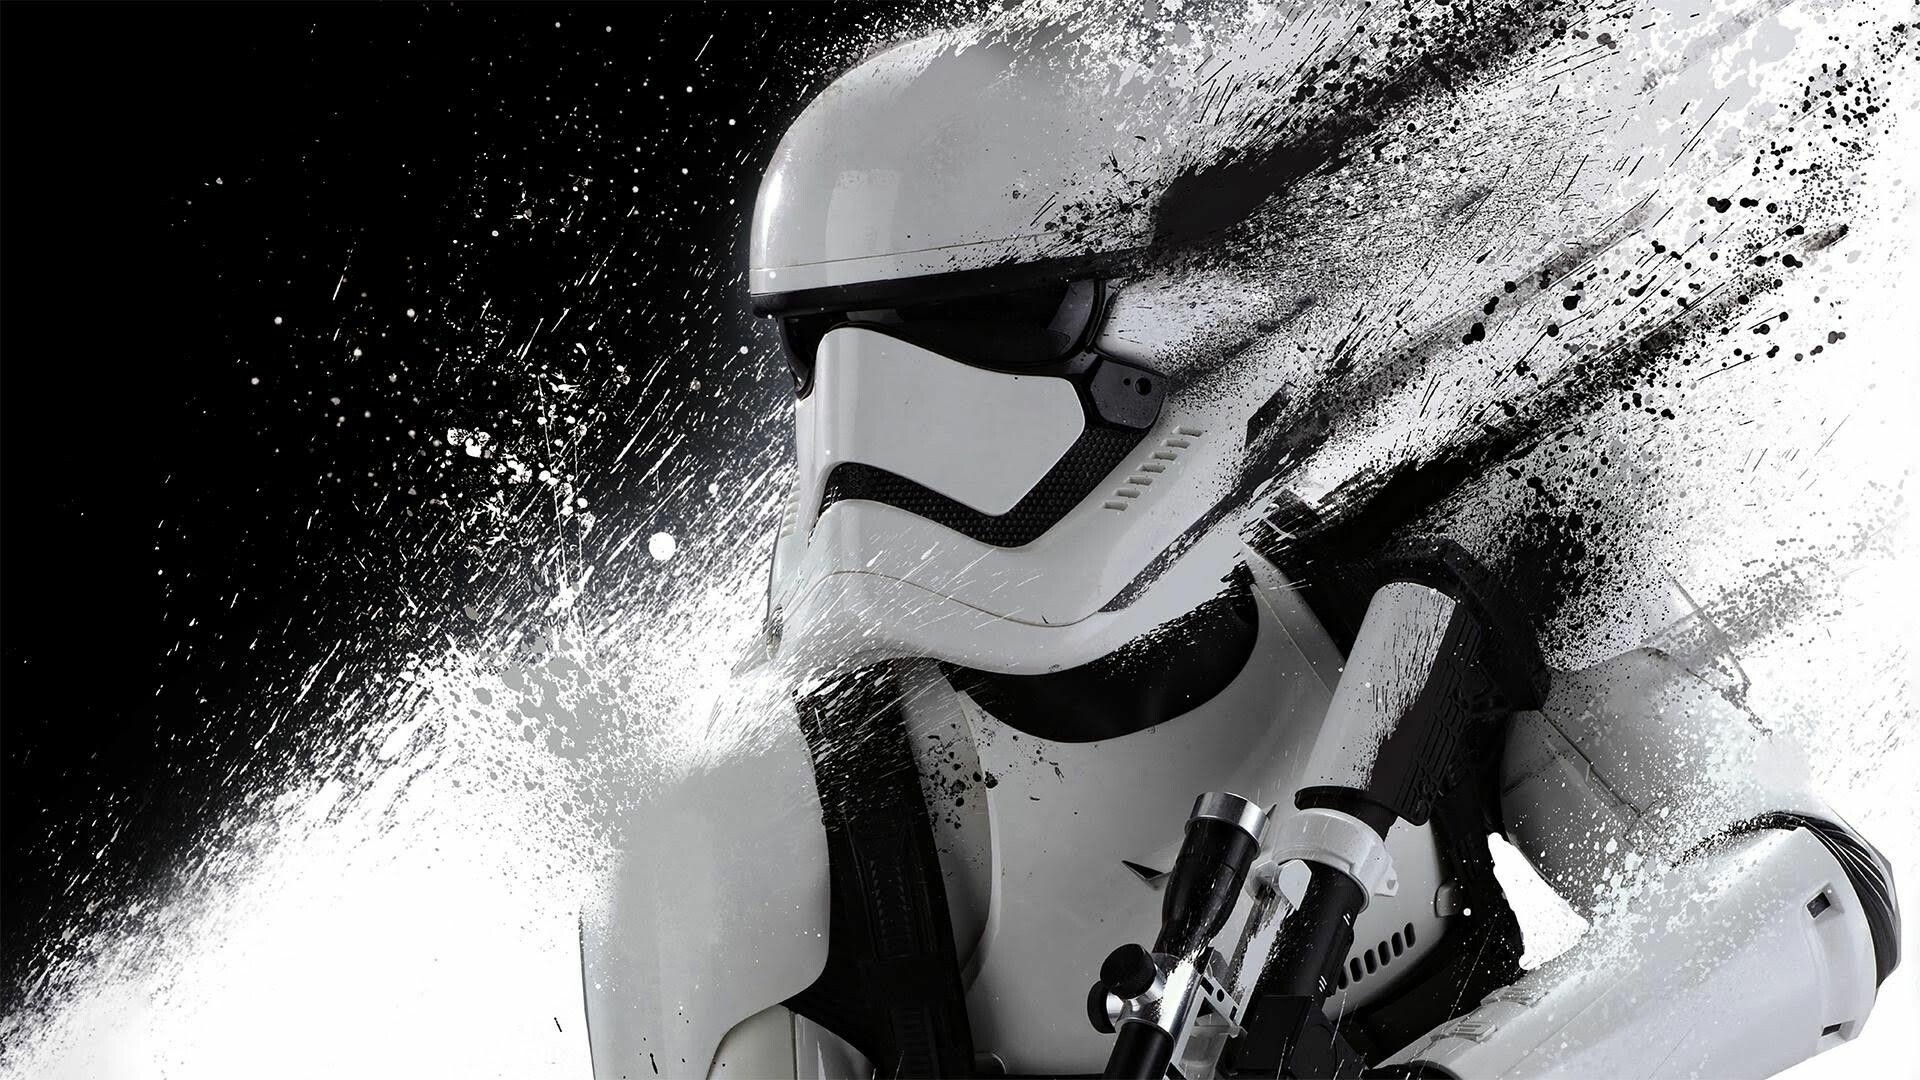 Star Wars: The Force Awakens, A 2015 American epic space opera, Black and white. 1920x1080 Full HD Wallpaper.